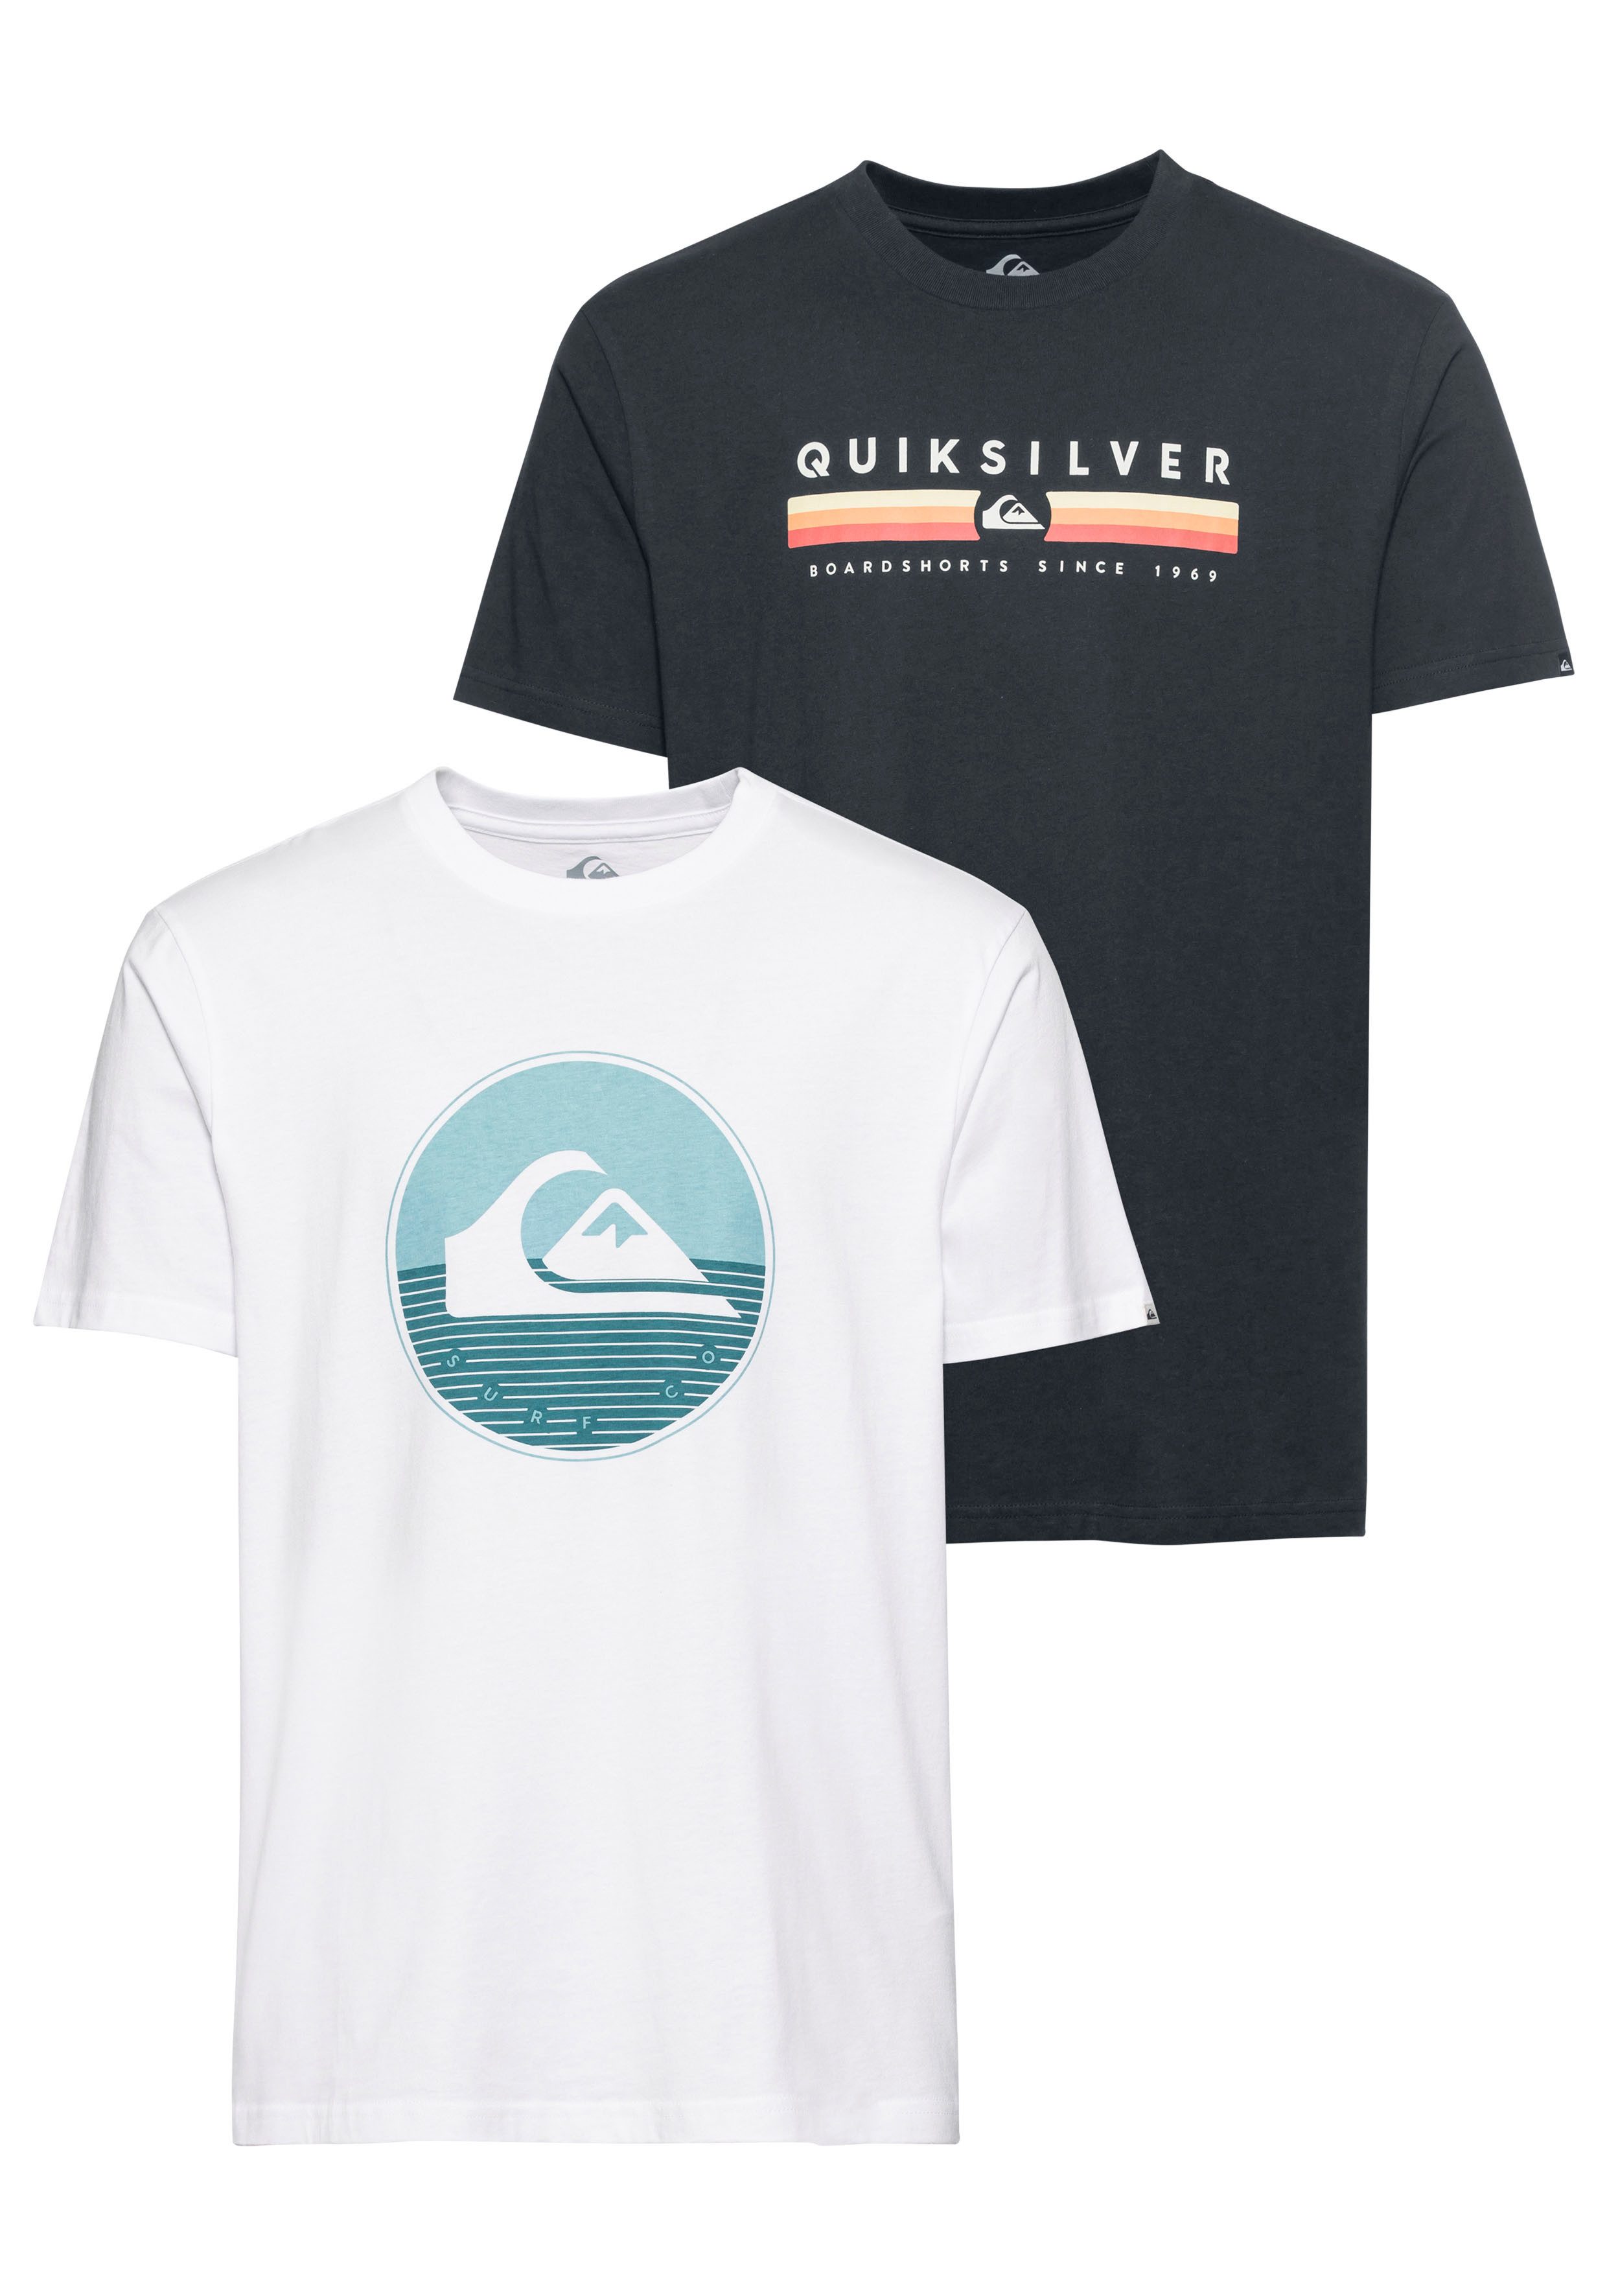 Quiksilver T-Shirt 2-tlg., 2er-Pack) (Packung,